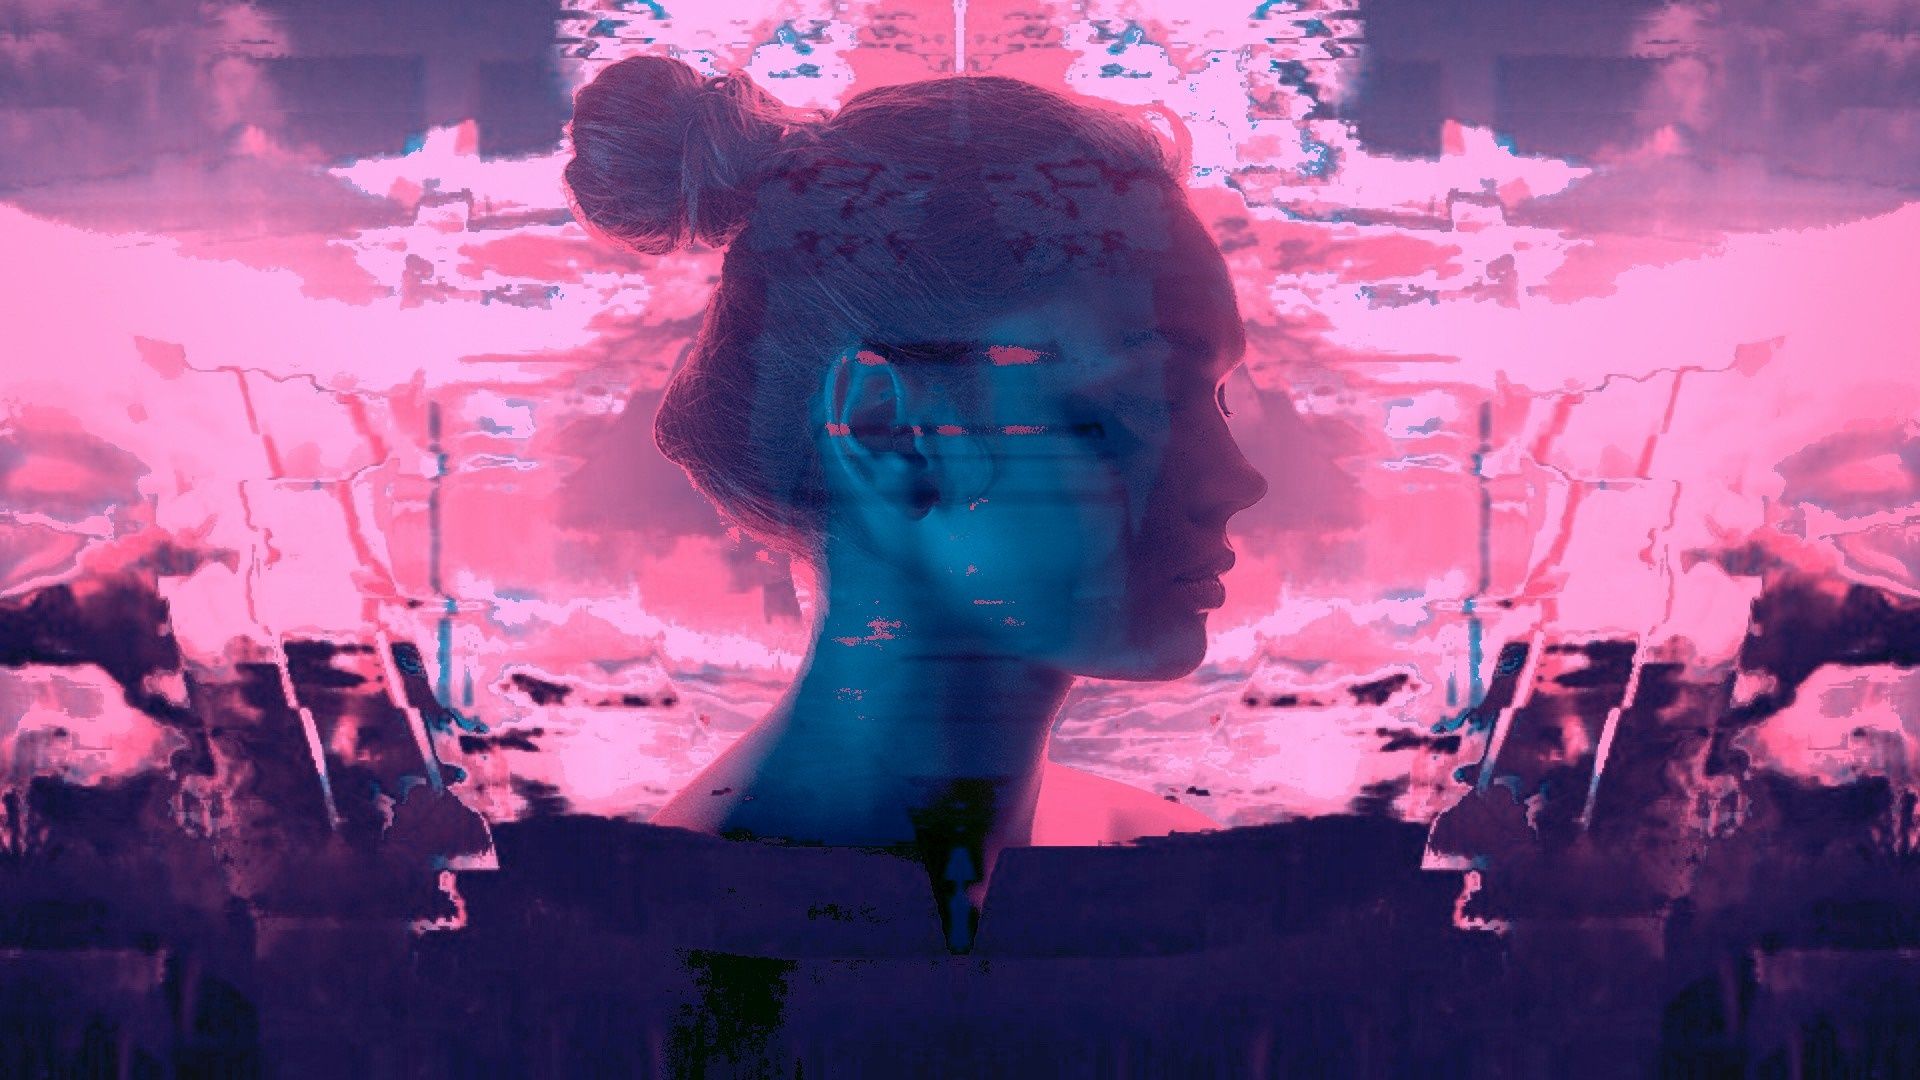 A distorted image of a woman's face in front of a pink and blue background - Eyes, glitch